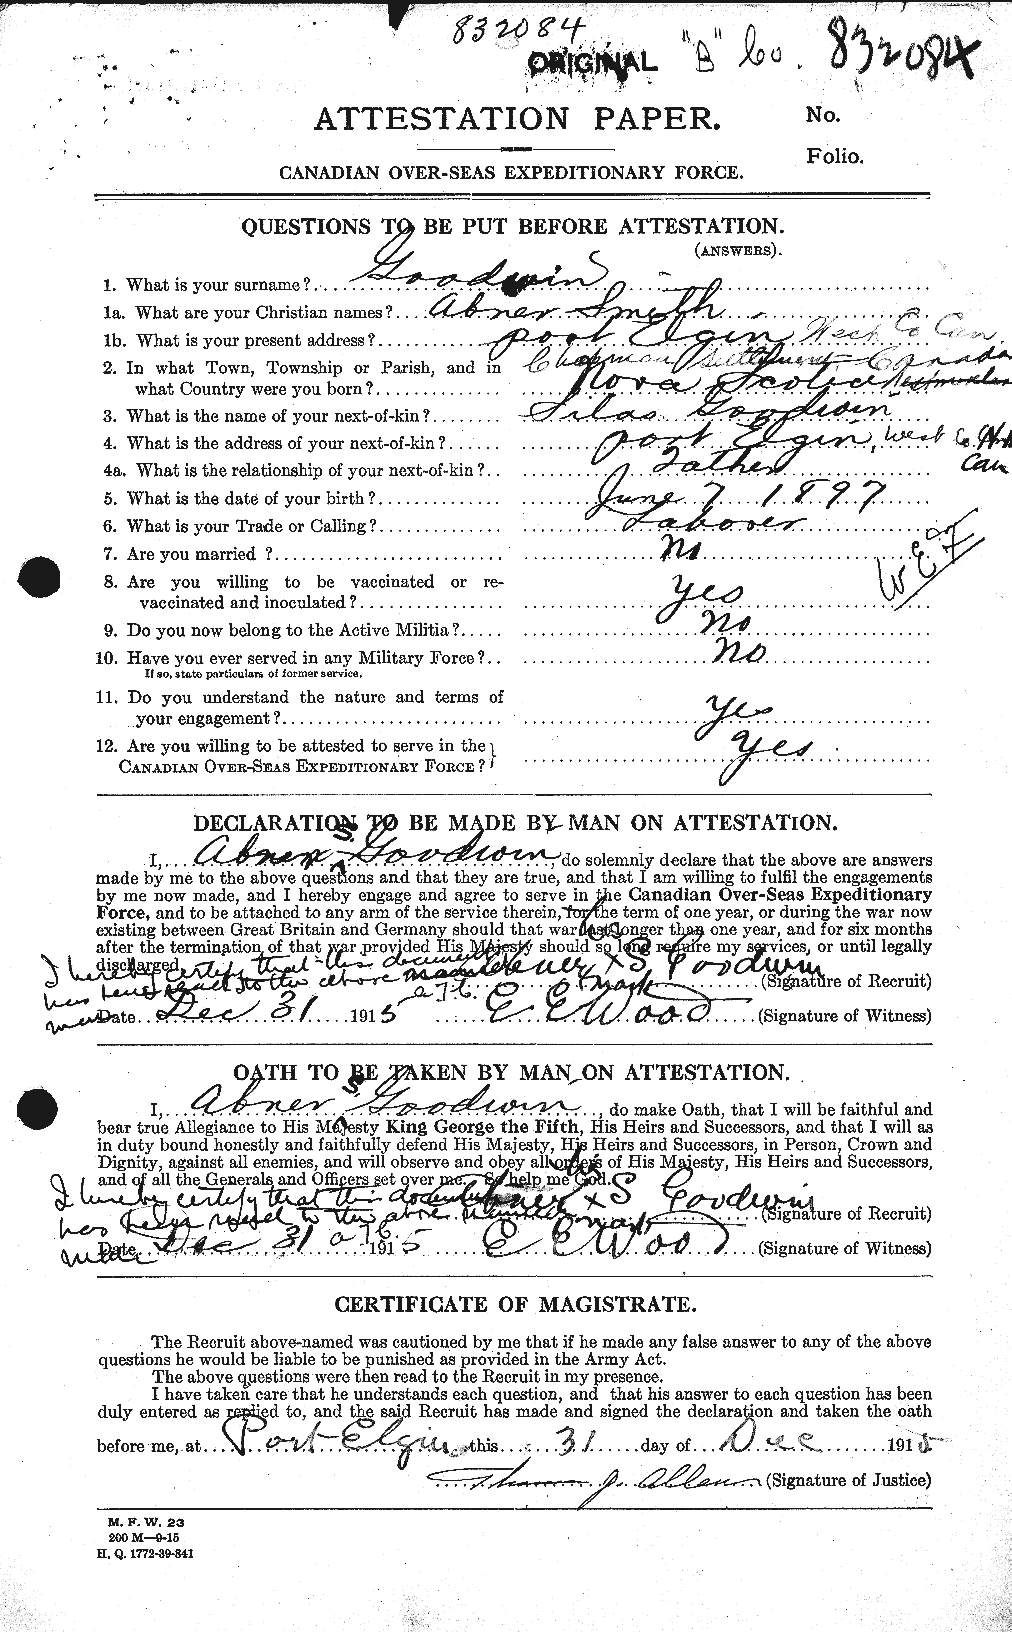 Personnel Records of the First World War - CEF 357914a